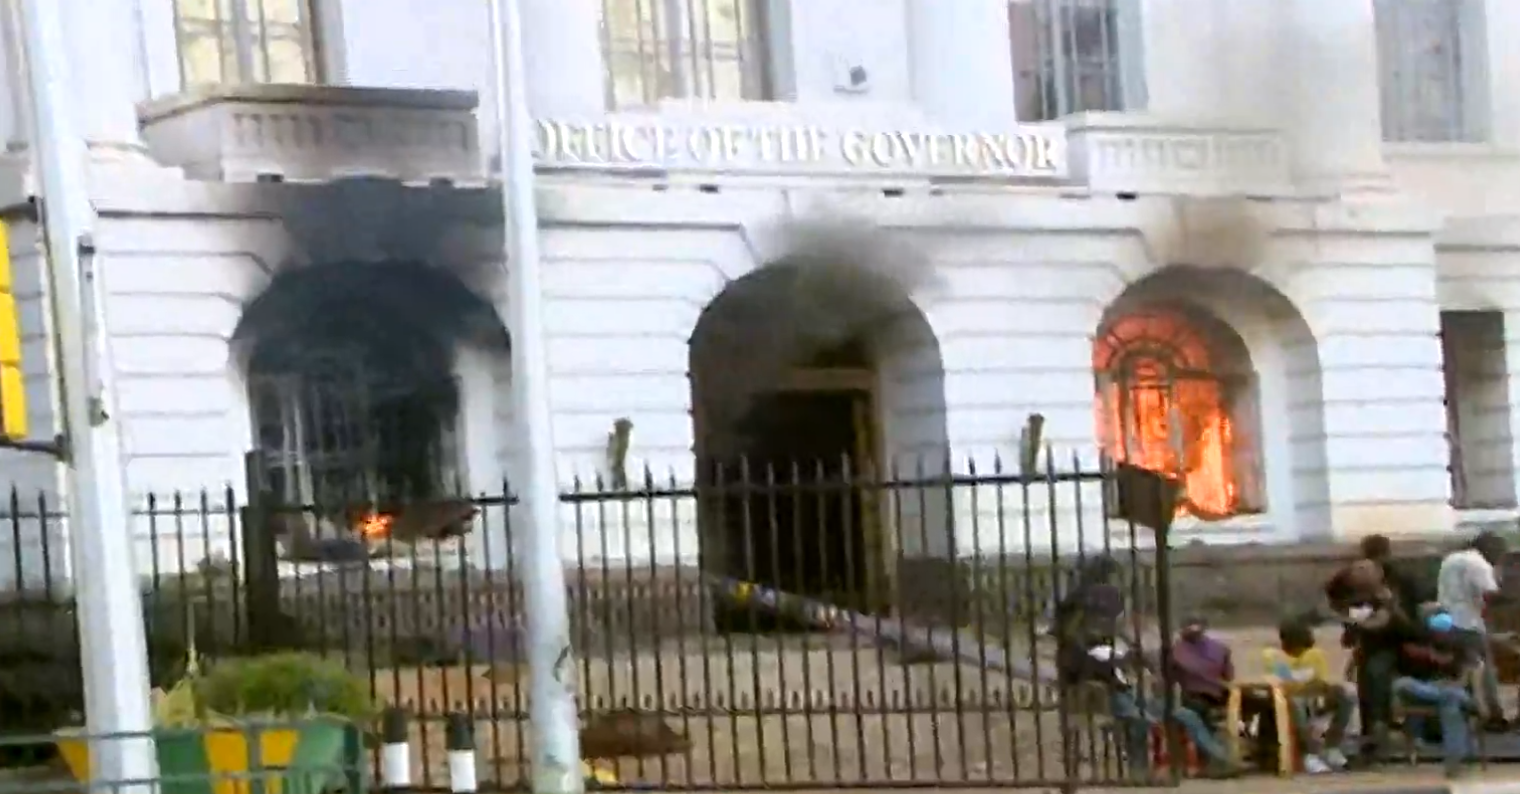 Sakaja: “One of the goons who burnt City Hall works at an MP’s office”